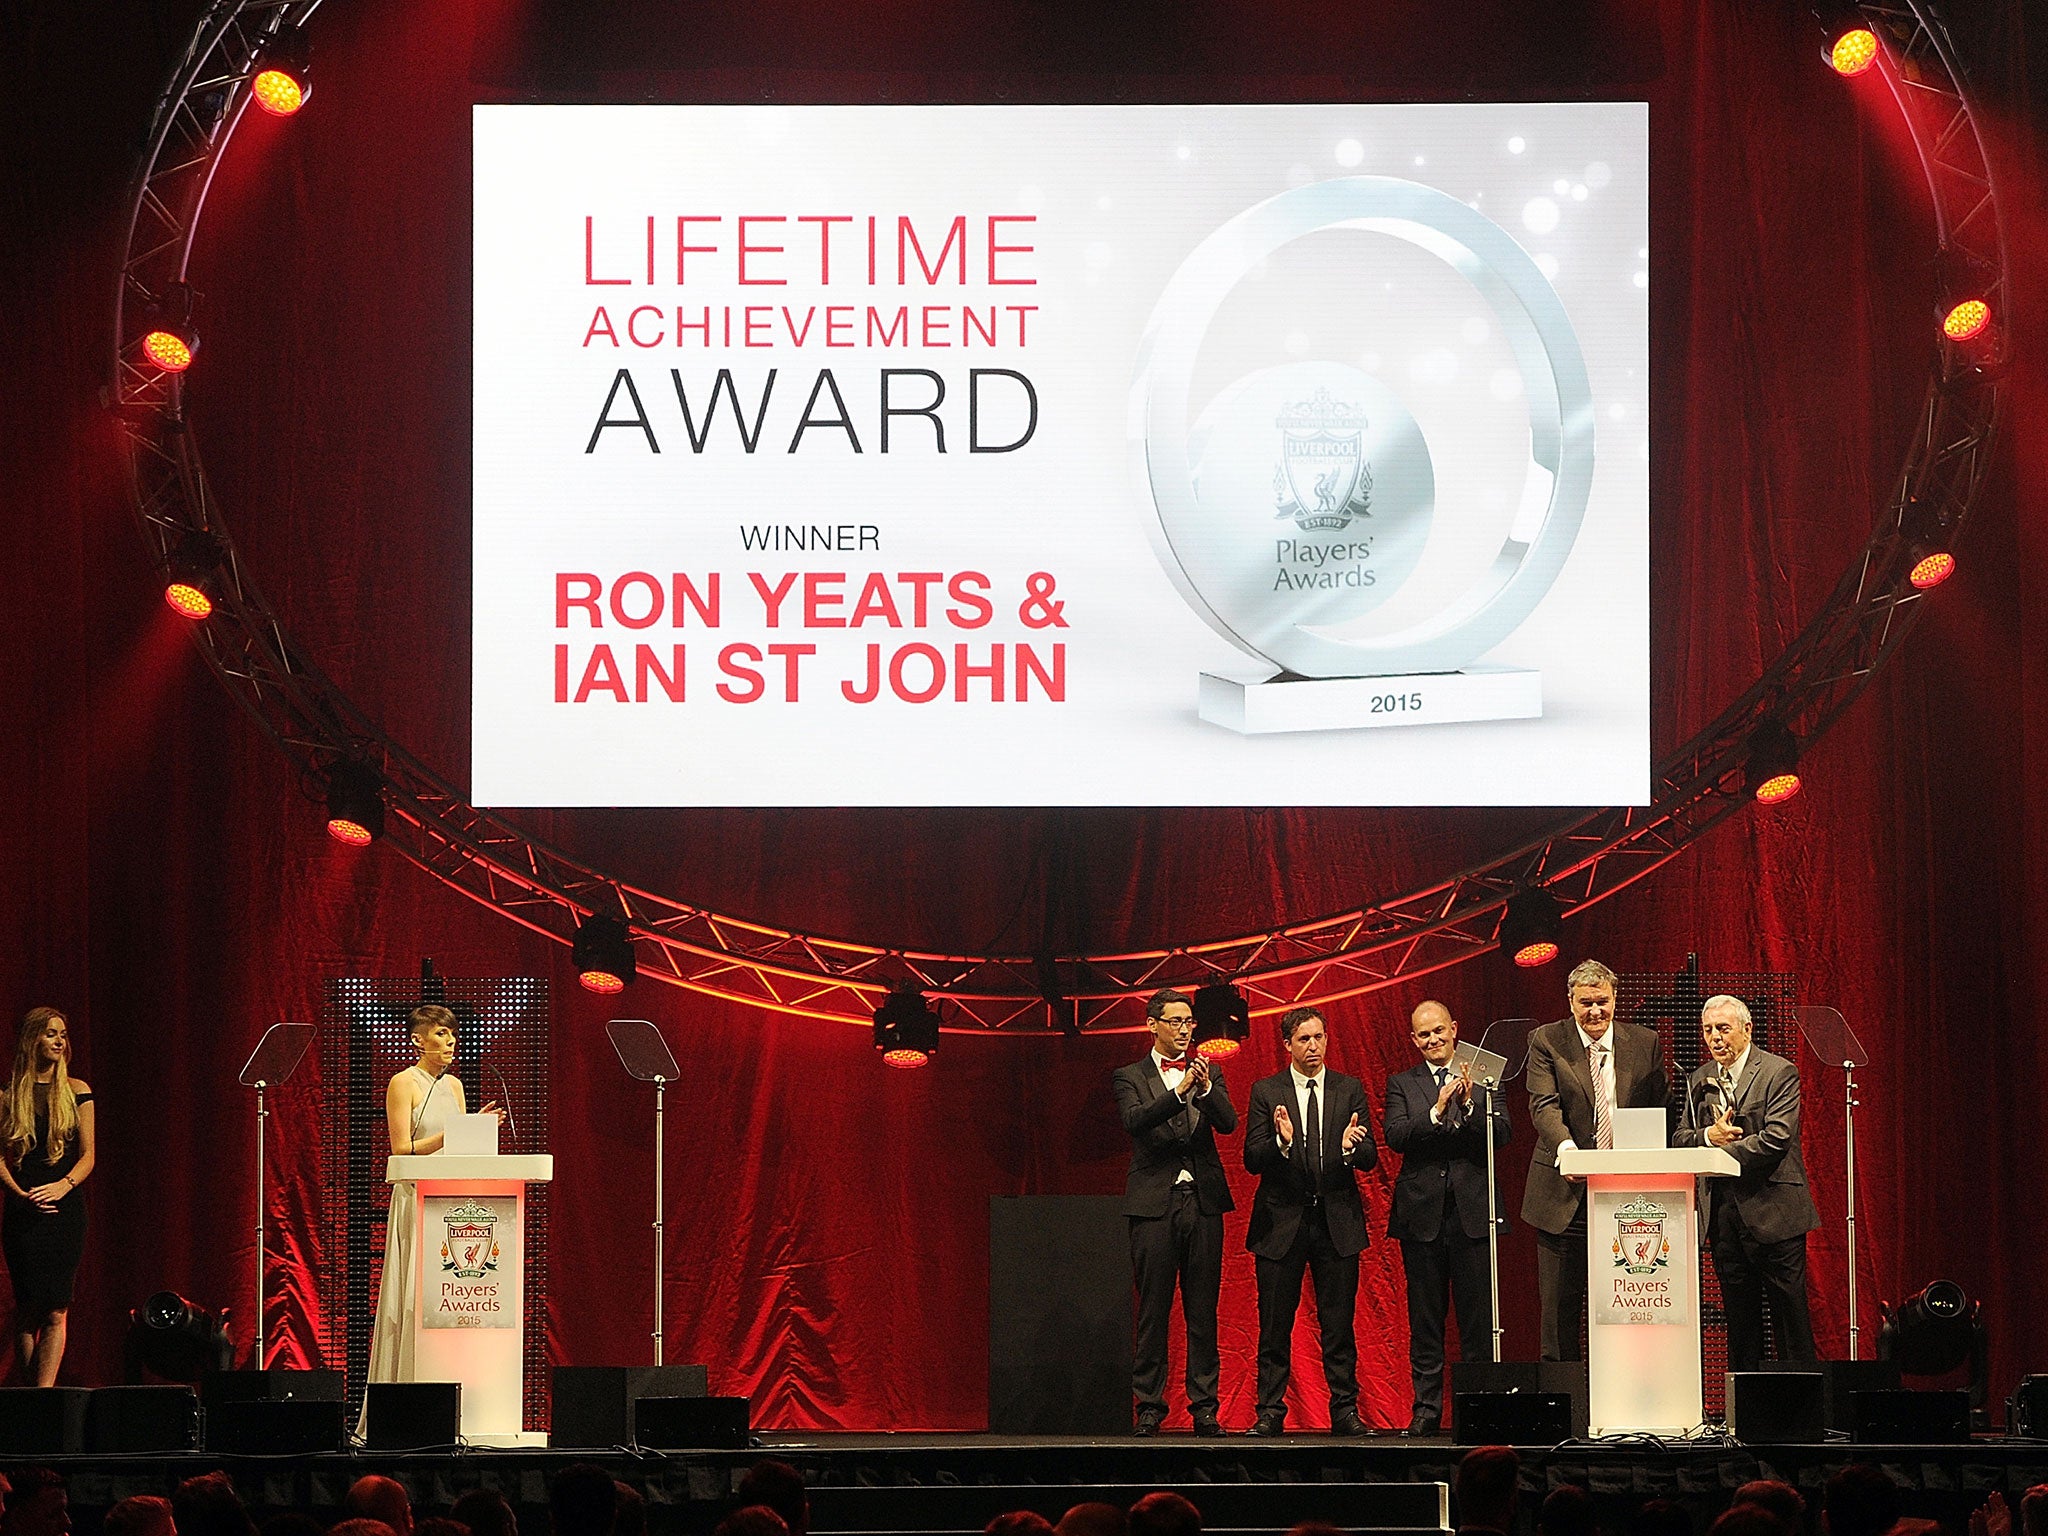 Yeats and St John were honoured by Liverpool with Lifetime Achievement awards in May 2015